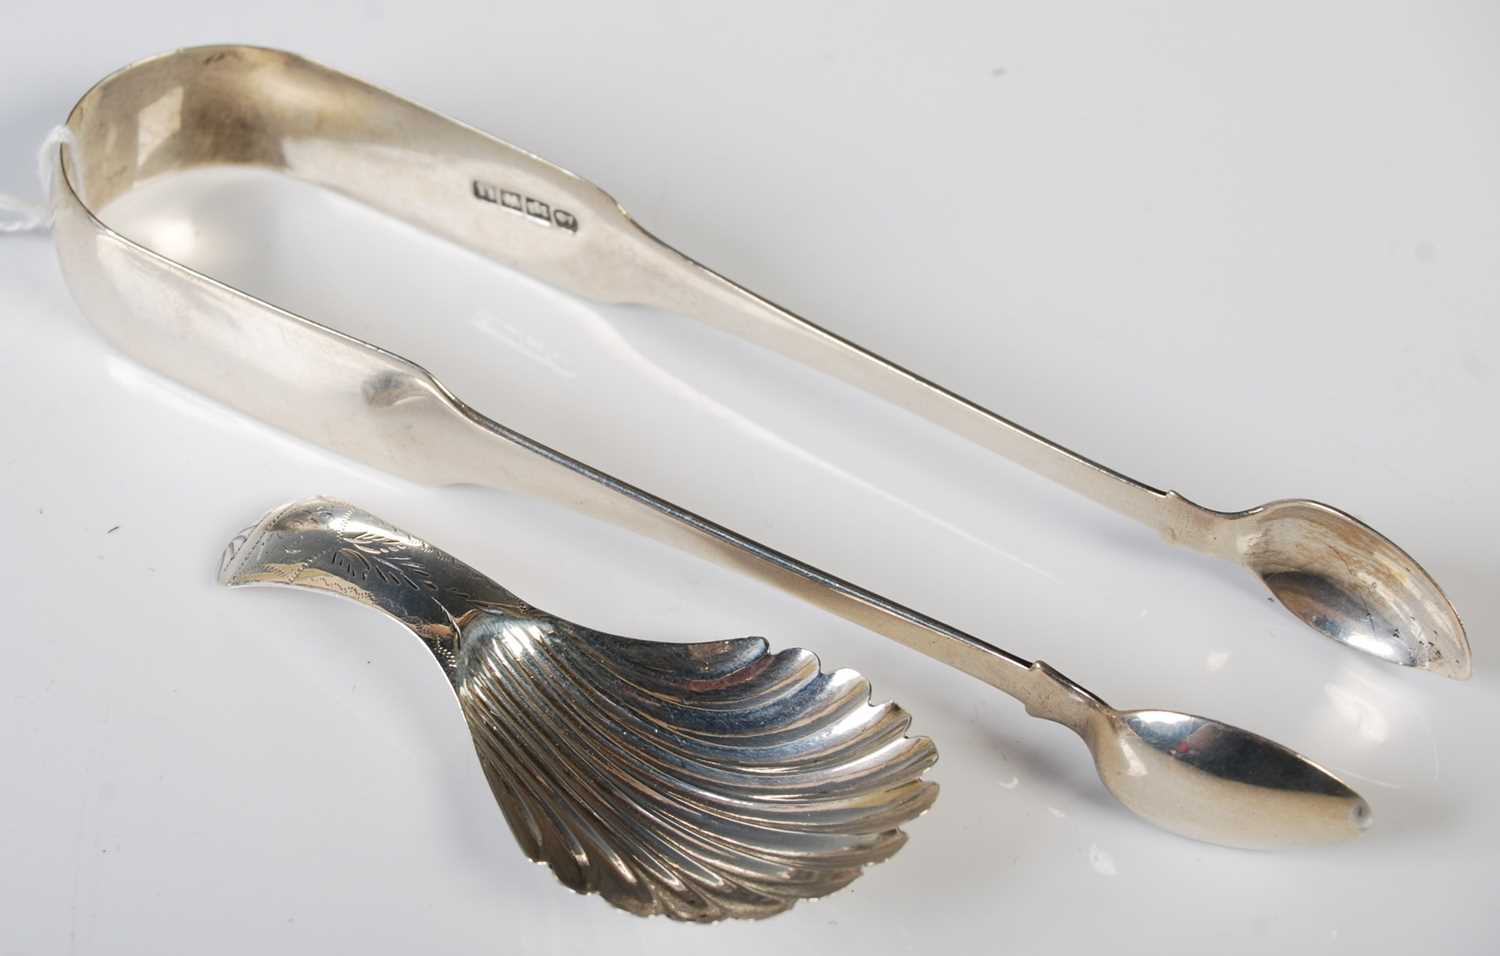 A William IV silver caddy spoon, Birmingham, 1832, makers mark T & P, together with a pair of George